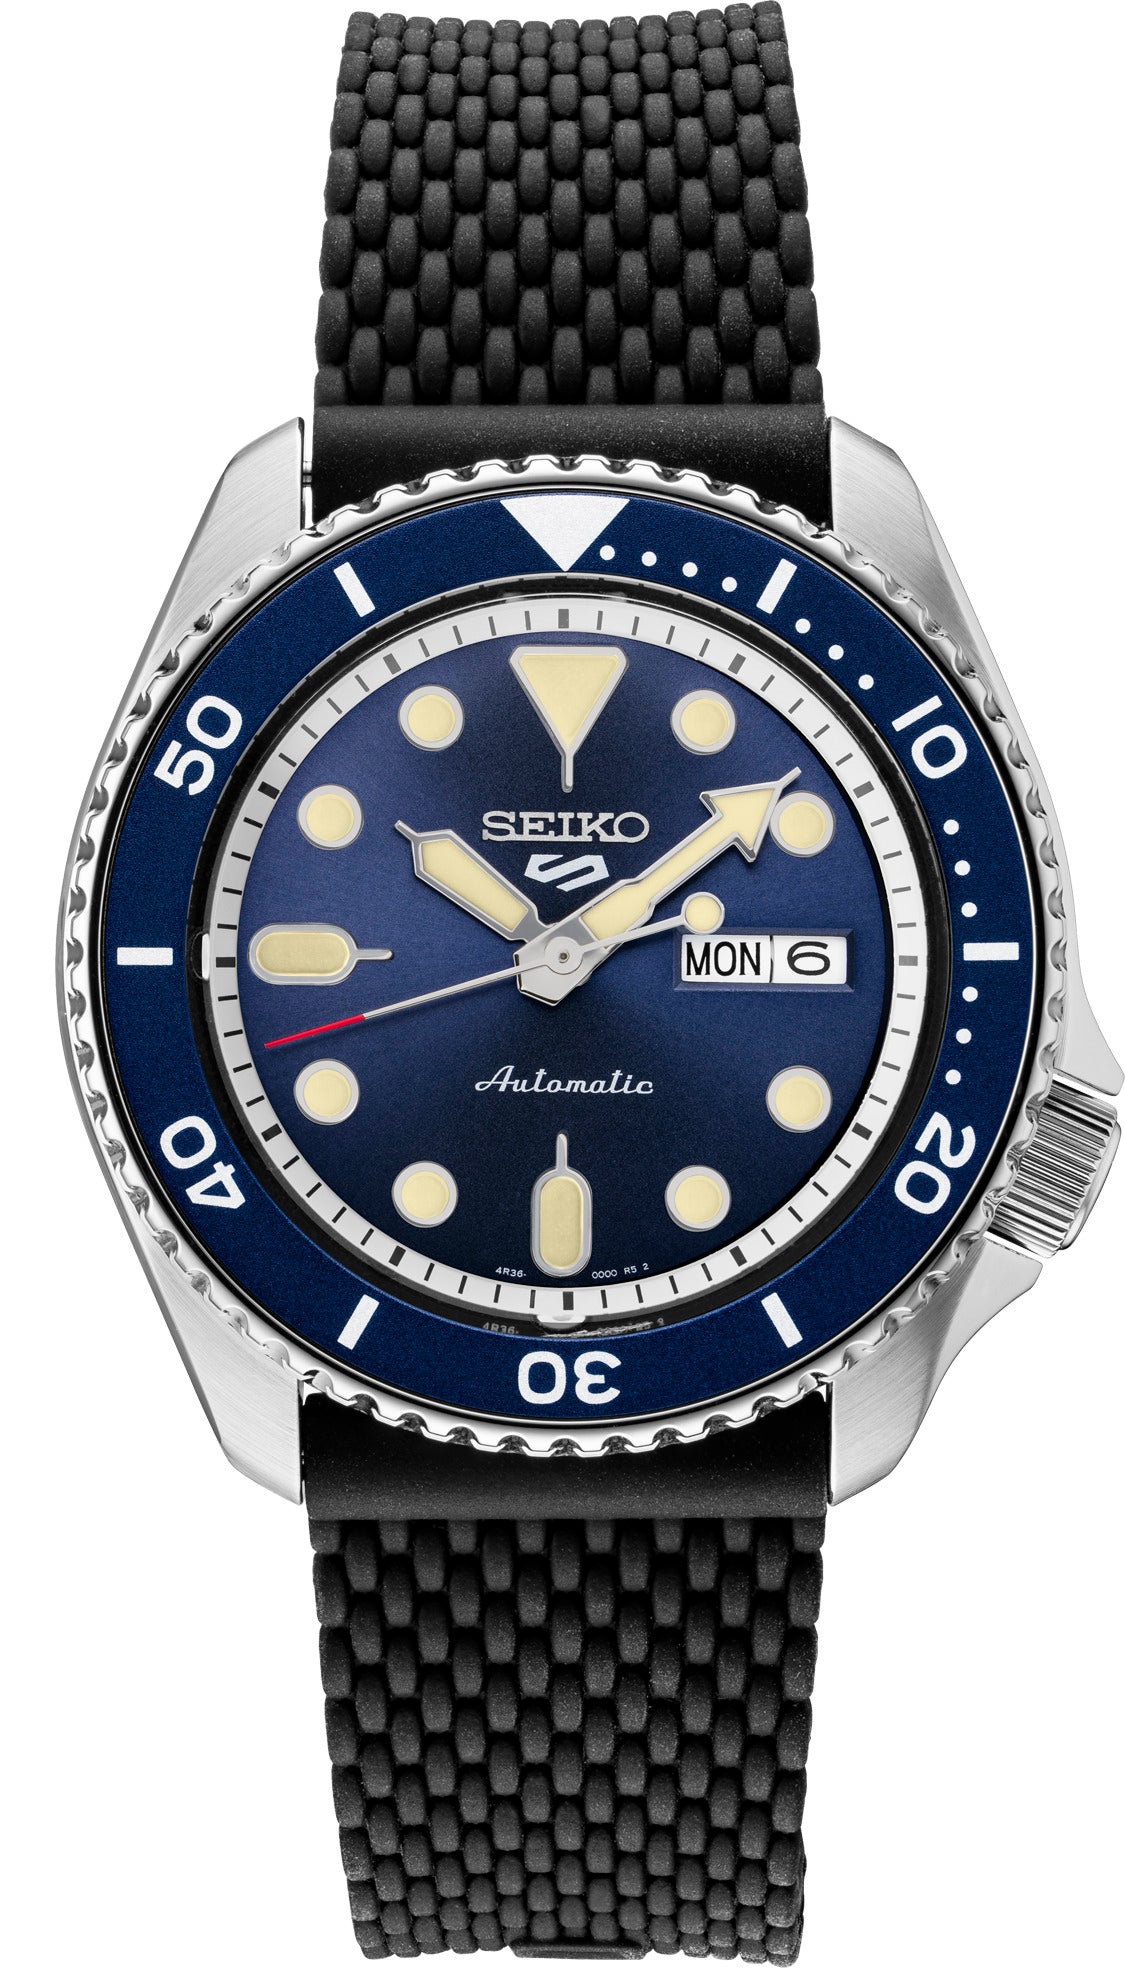 Seiko 5 Sports Men's Stainless Watch in color Black, Blue from the front view